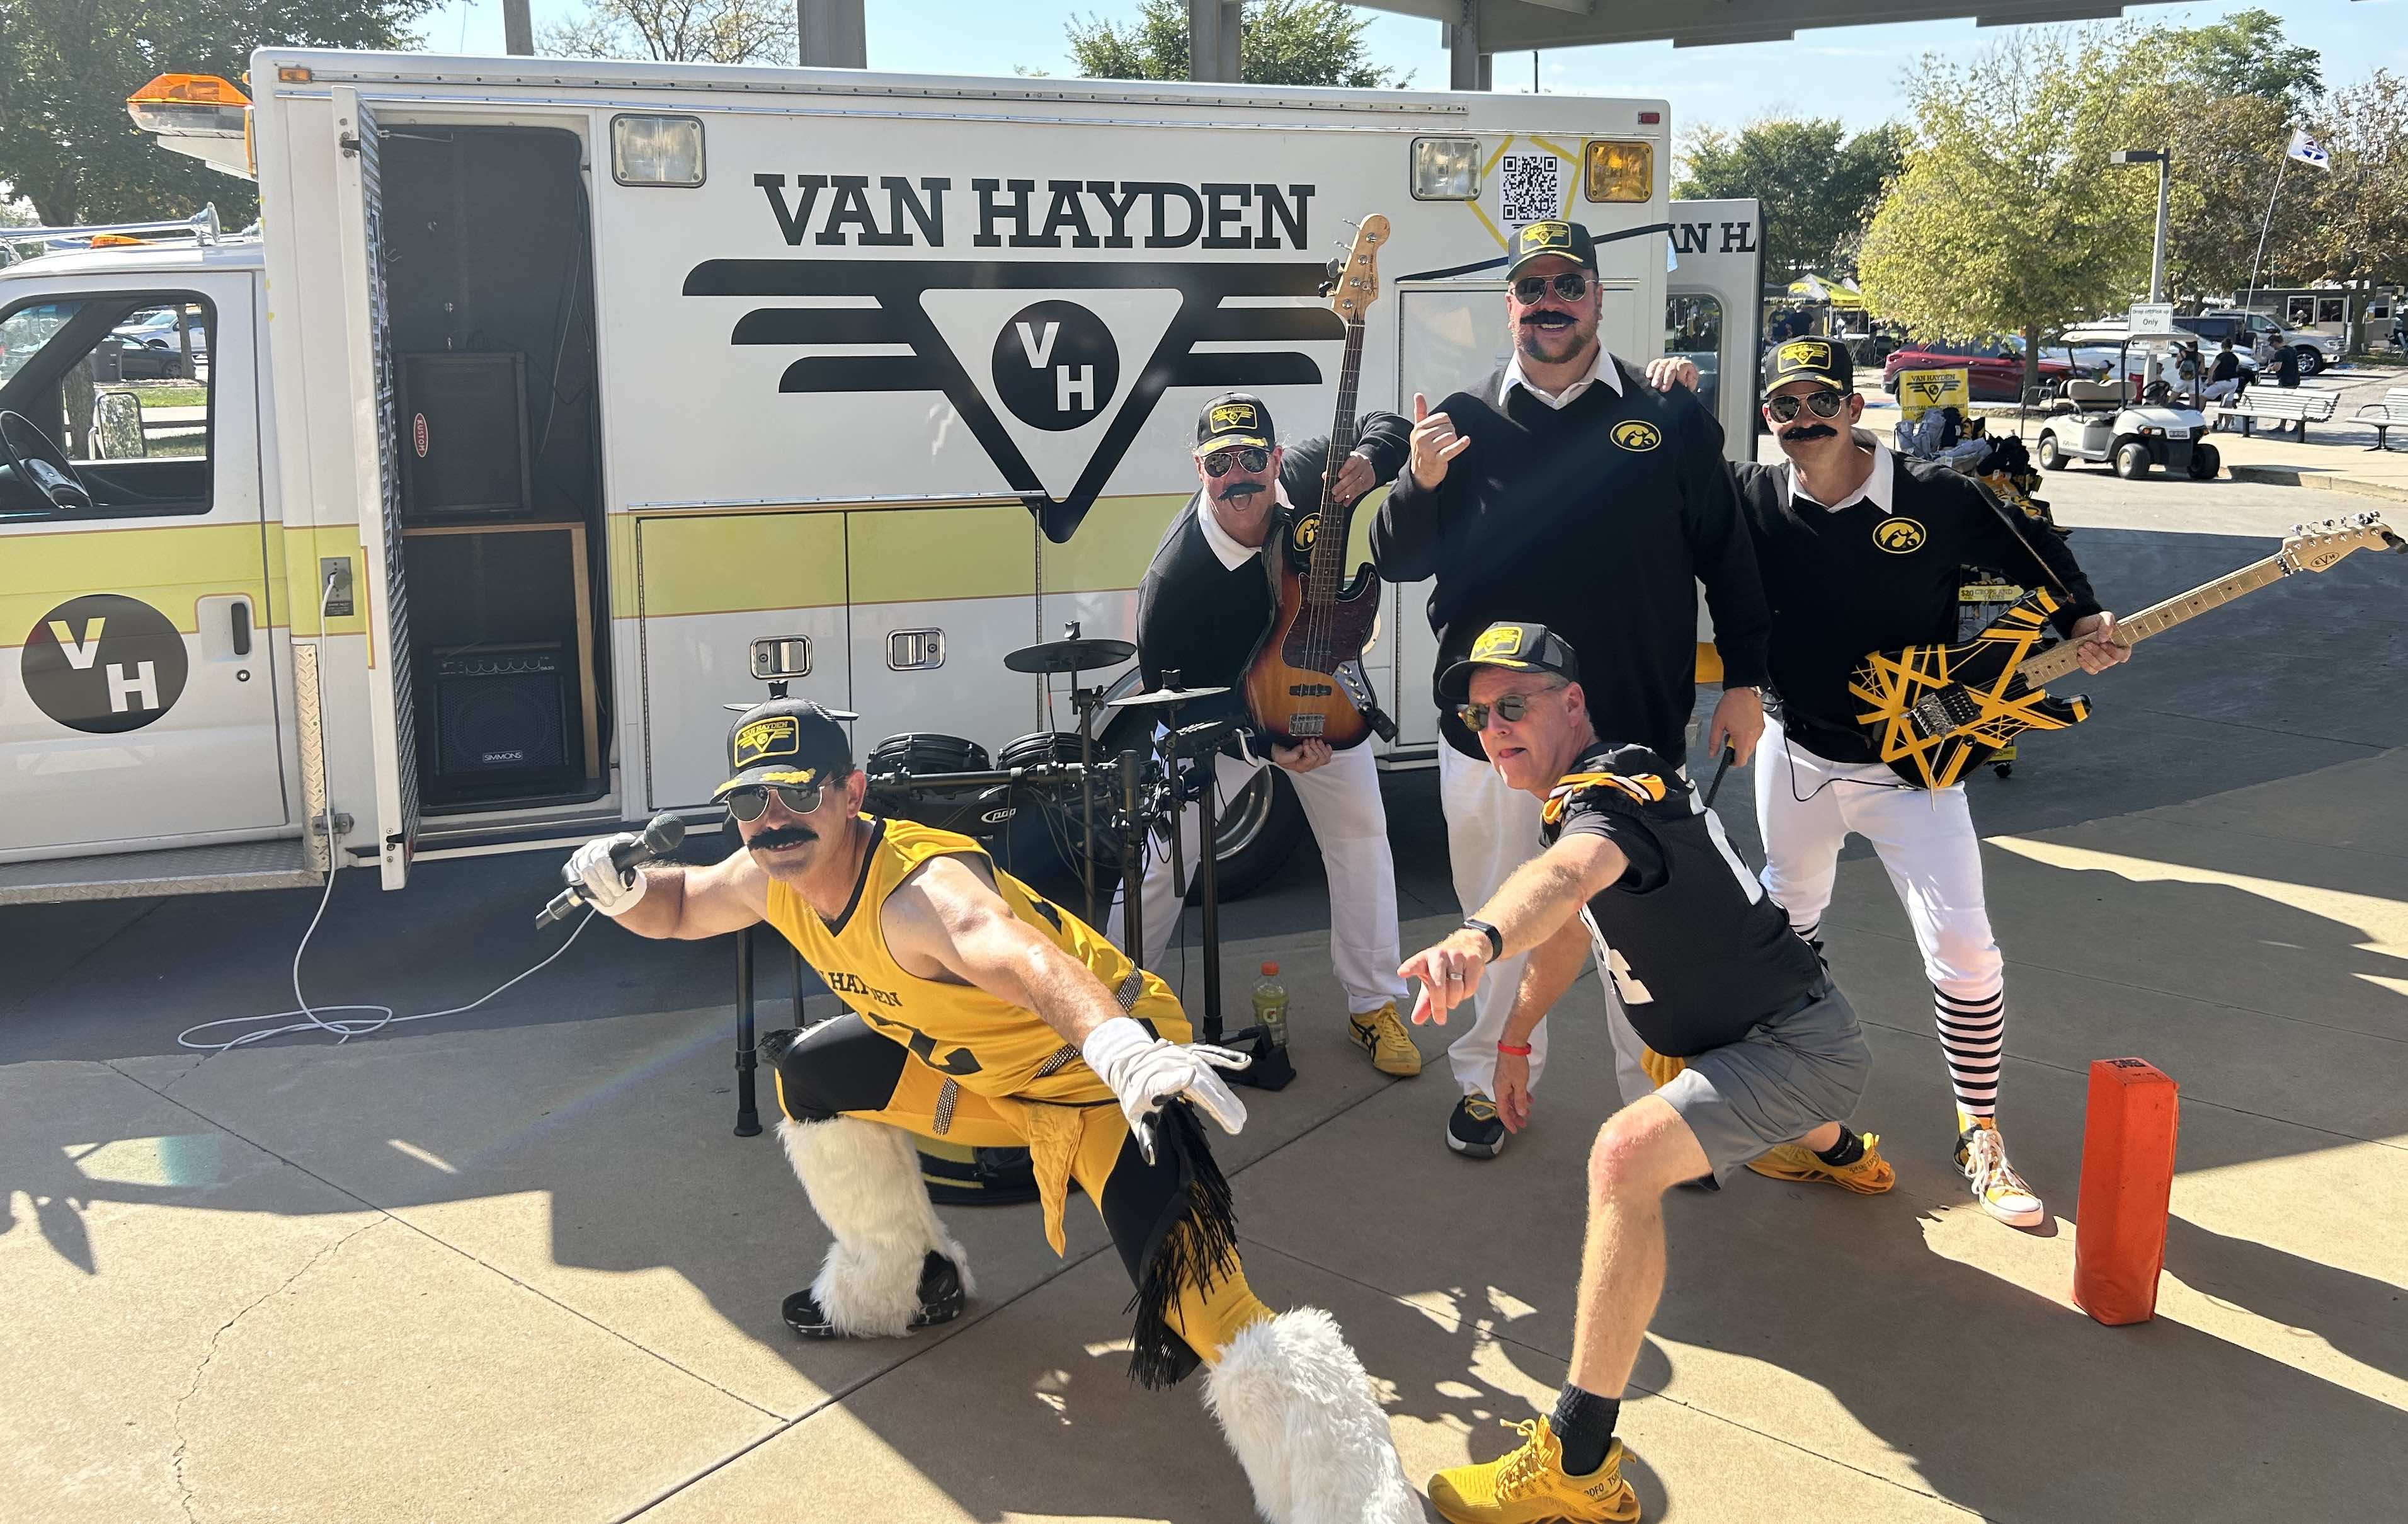 Van Hayden Band posing at the Raecker family tailgate in front of the Vanbulance before the Iowa vs. Michigan State game